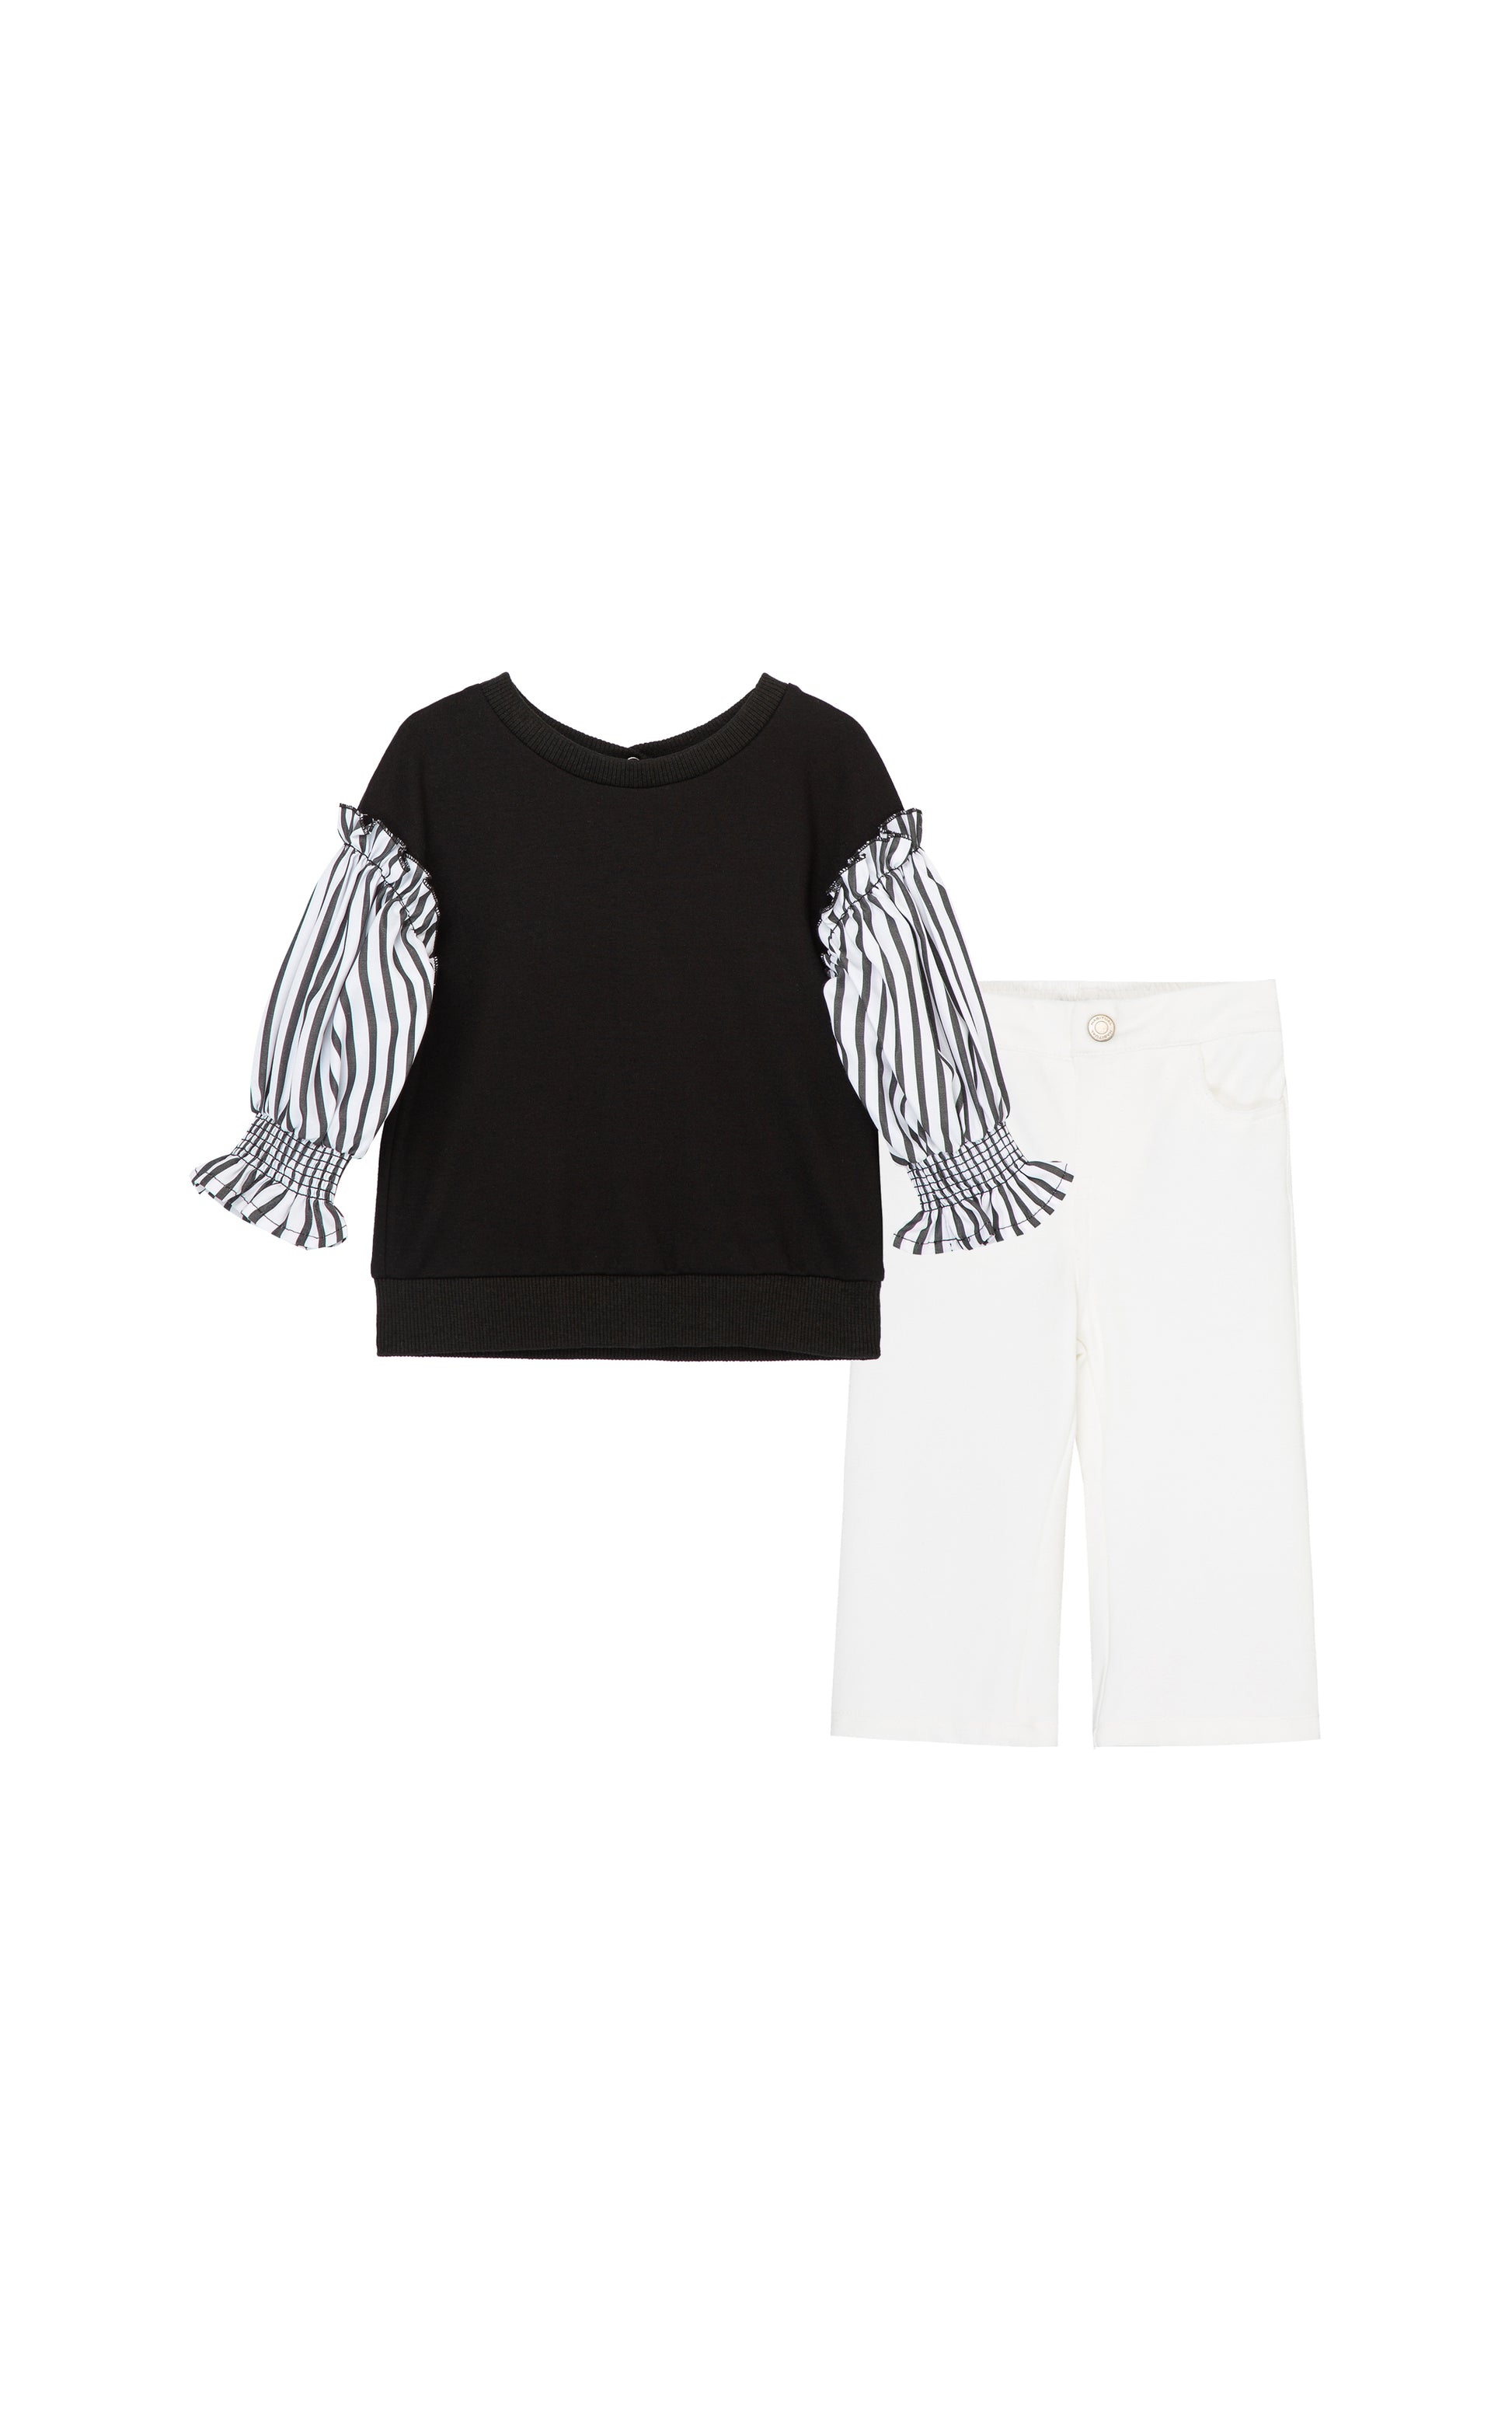 BLACK KNIT TOP WITH WOVEN BLACK-AND-WHITE STRIPED SLEEVES, PAIRED WITH A KNIT PULL-ON PANT THAT LOOKS LIKE A JEAN